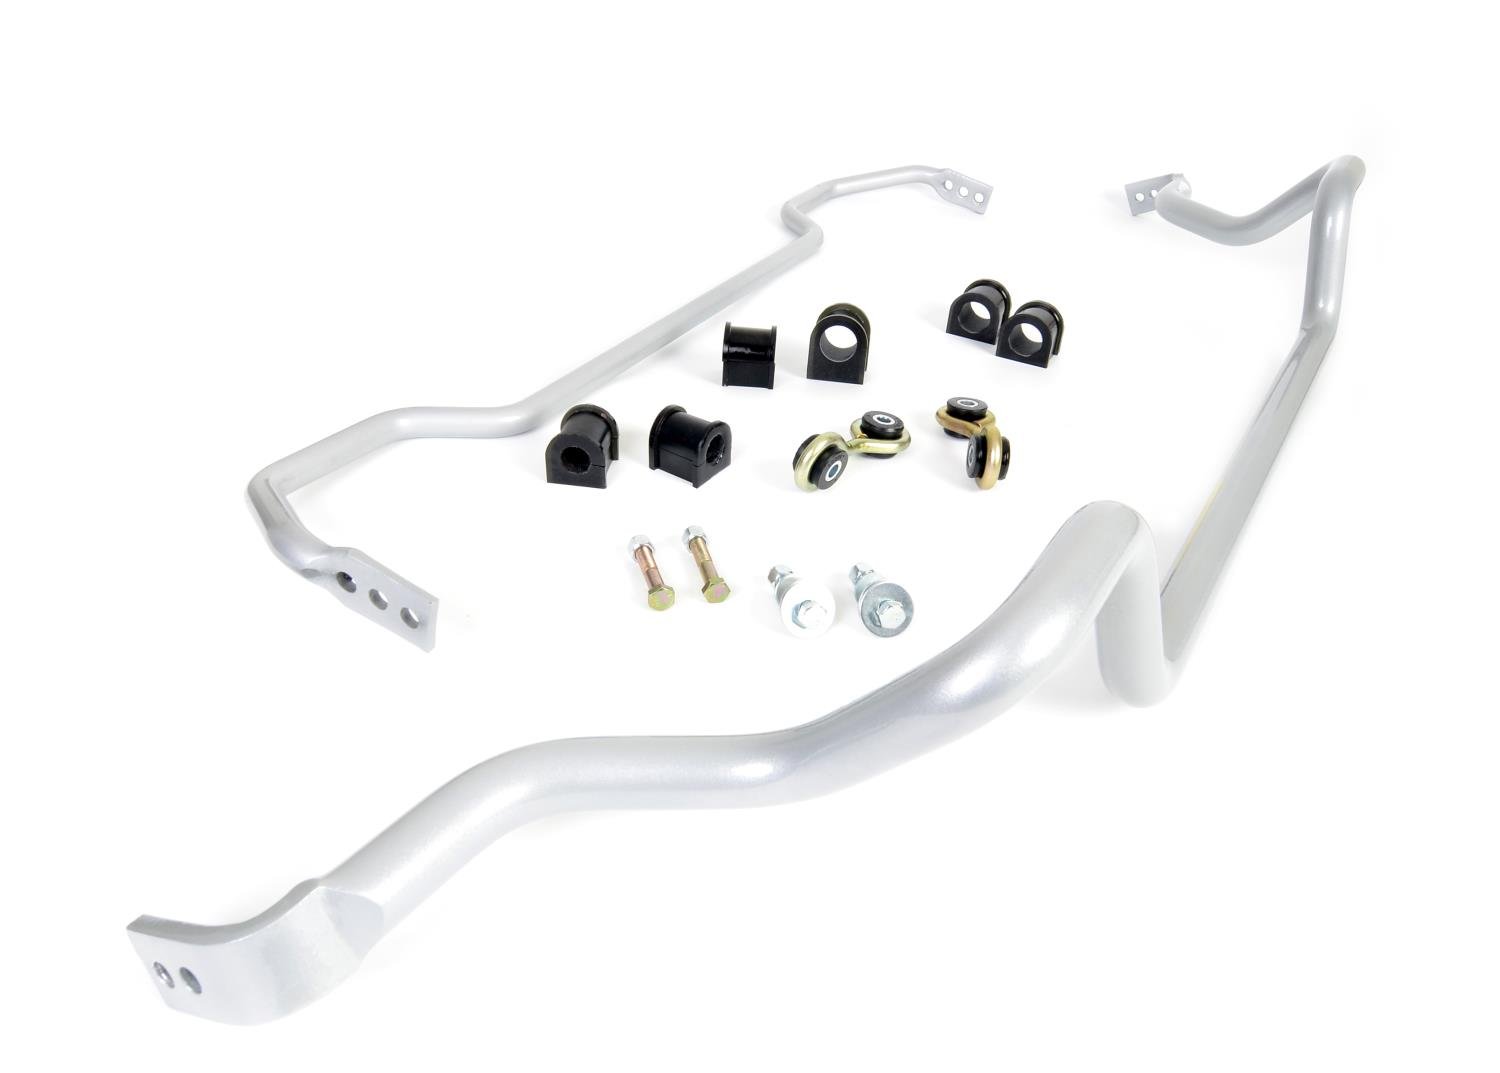 BTK007 Front and Rear Sway Bar Kit for 1993-1998 Toyota Supra